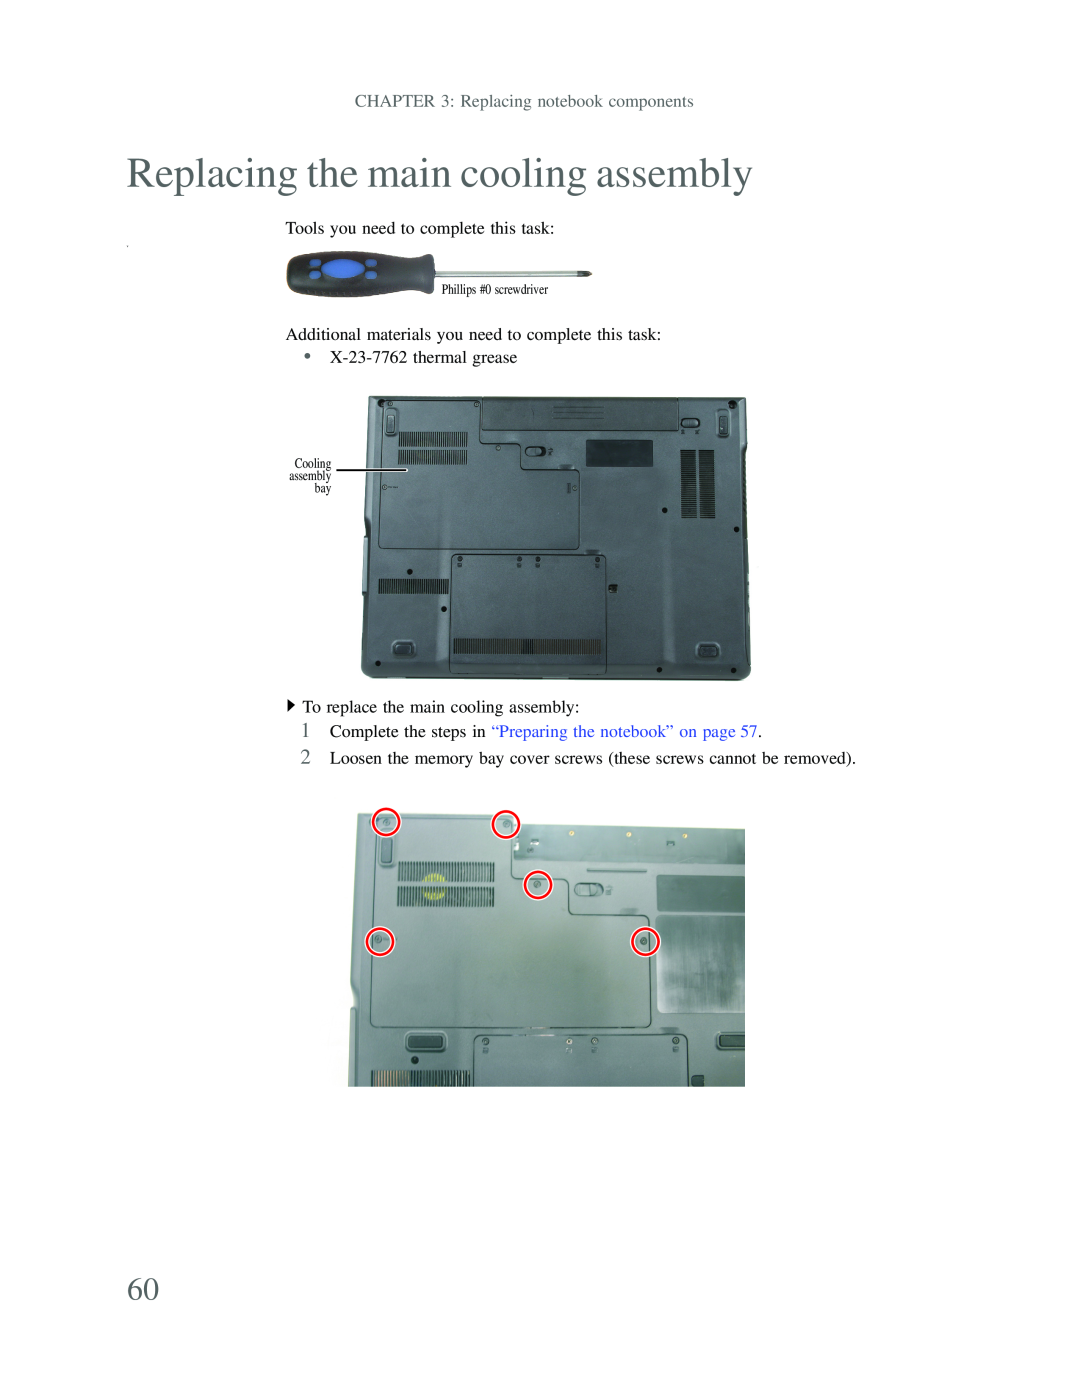 Gateway p-79 manual Replacing the main cooling assembly, Replacing notebook components, Phillips #0 screwdriver 